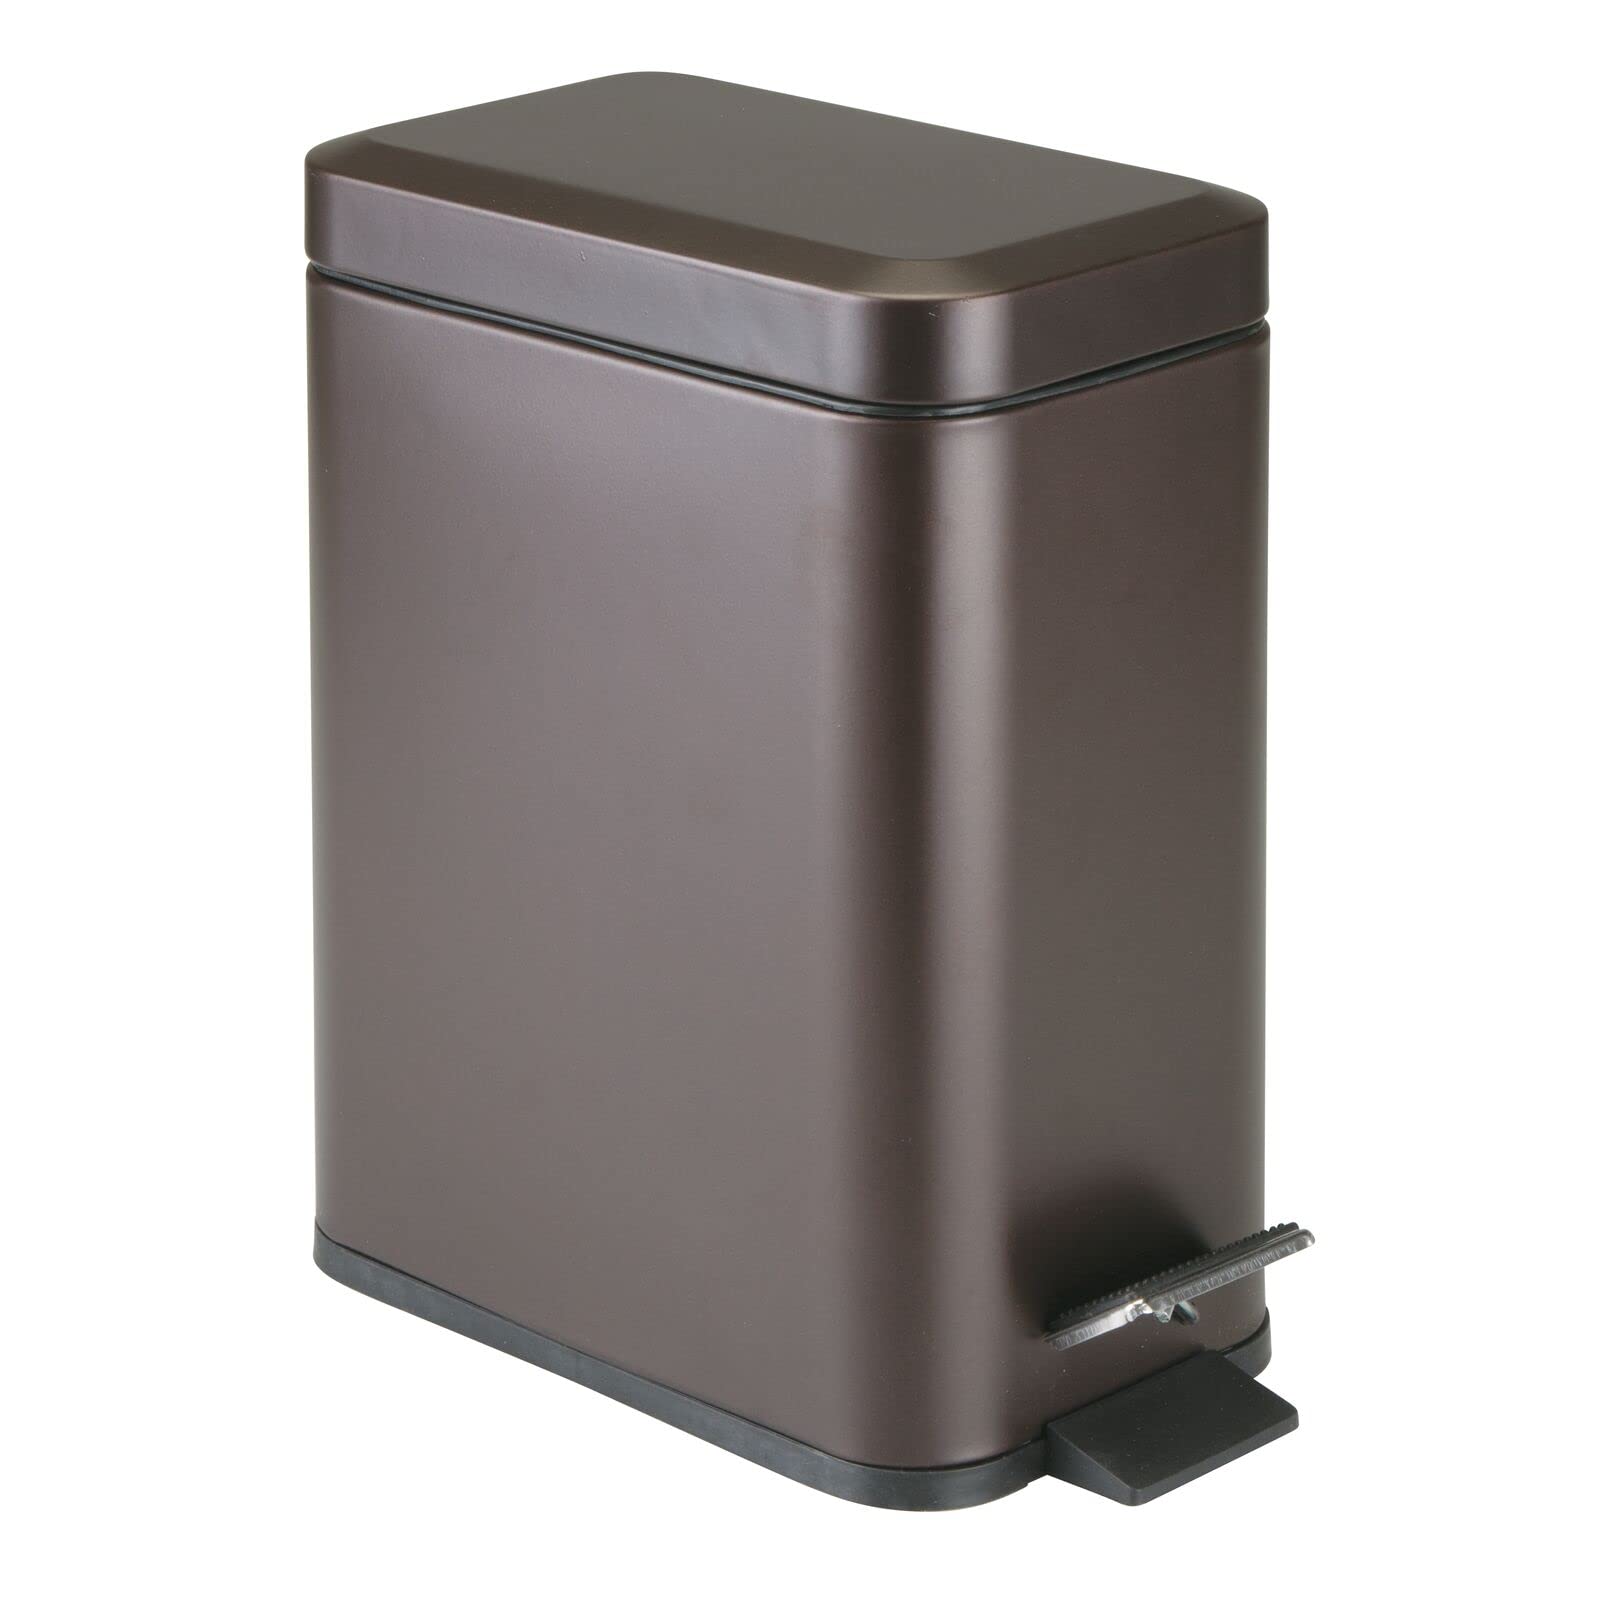 Book Cover mDesign Small Modern 1.3 Gallon Rectangle Metal Lidded Step Trash Can, Compact Garbage Bin with Removable Liner Bucket and Handle for Bathroom, Kitchen, Craft Room, Office, Garage - Bronze Bronze 1.3 Gallon